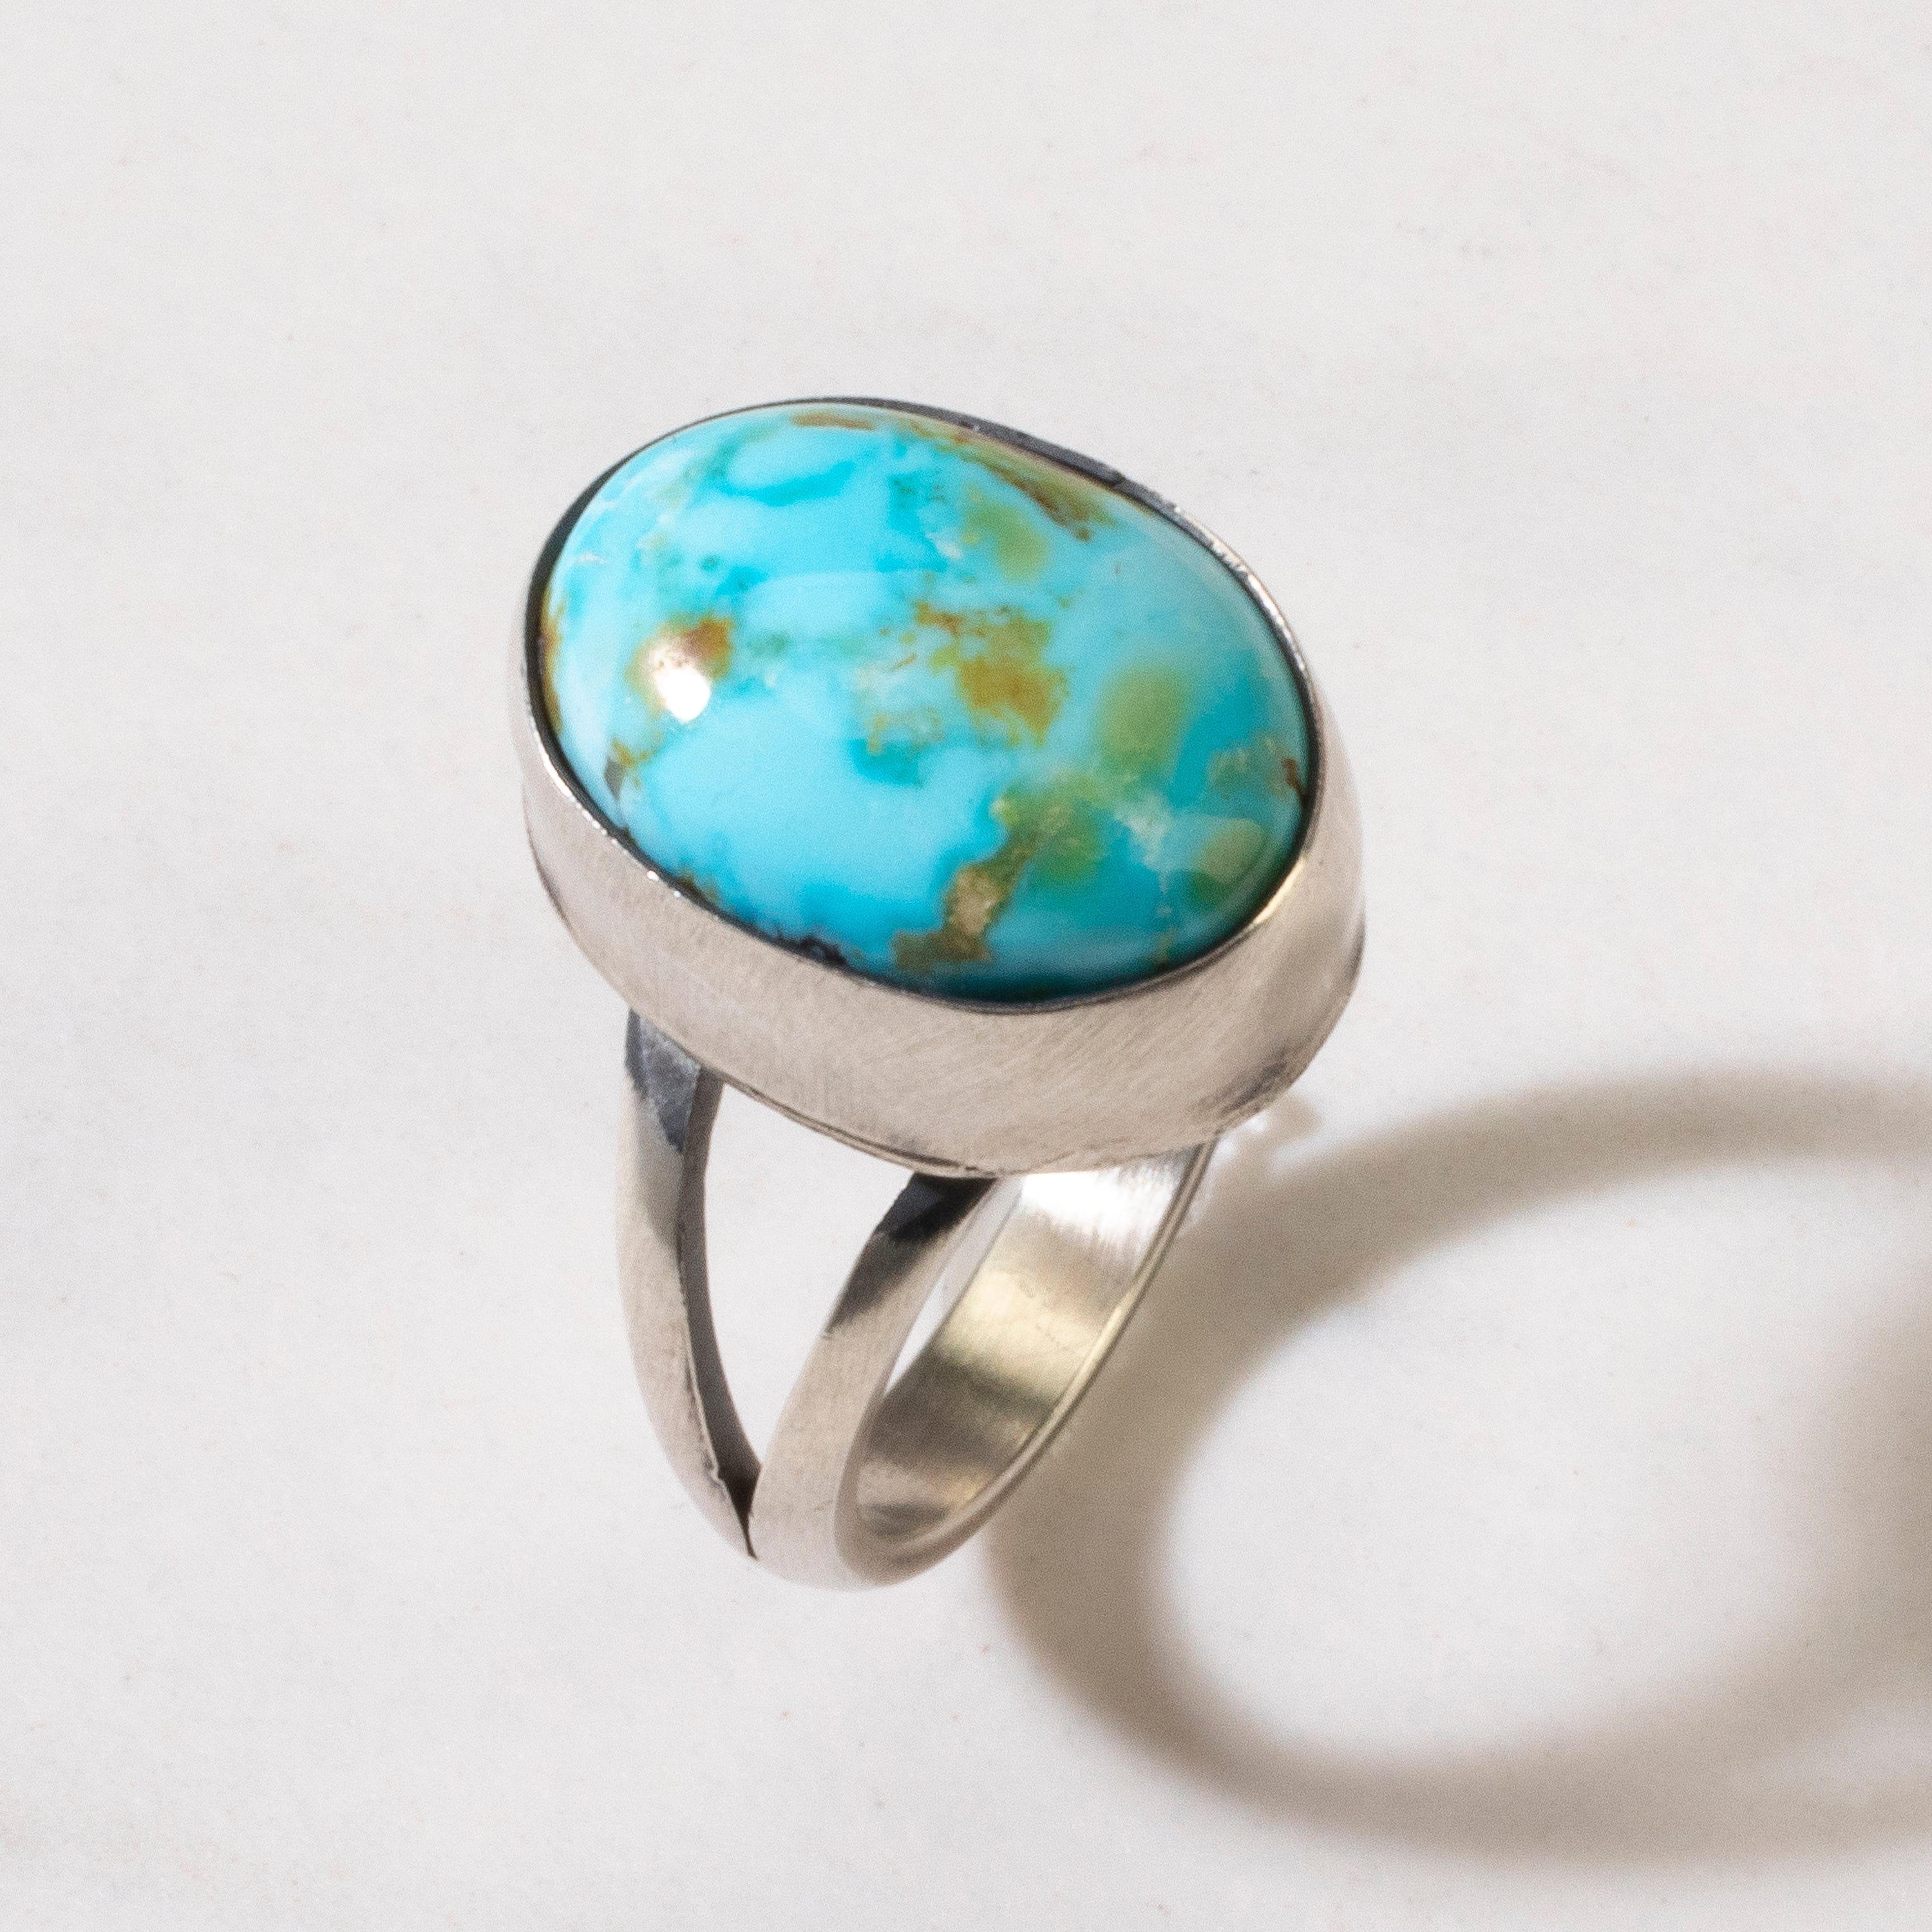 Kalifano Native American Jewelry 6 Scott Skeets Sonoran Gold Turquoise USA Native American Made 925 Sterling Silver Ring NAR600.050.6